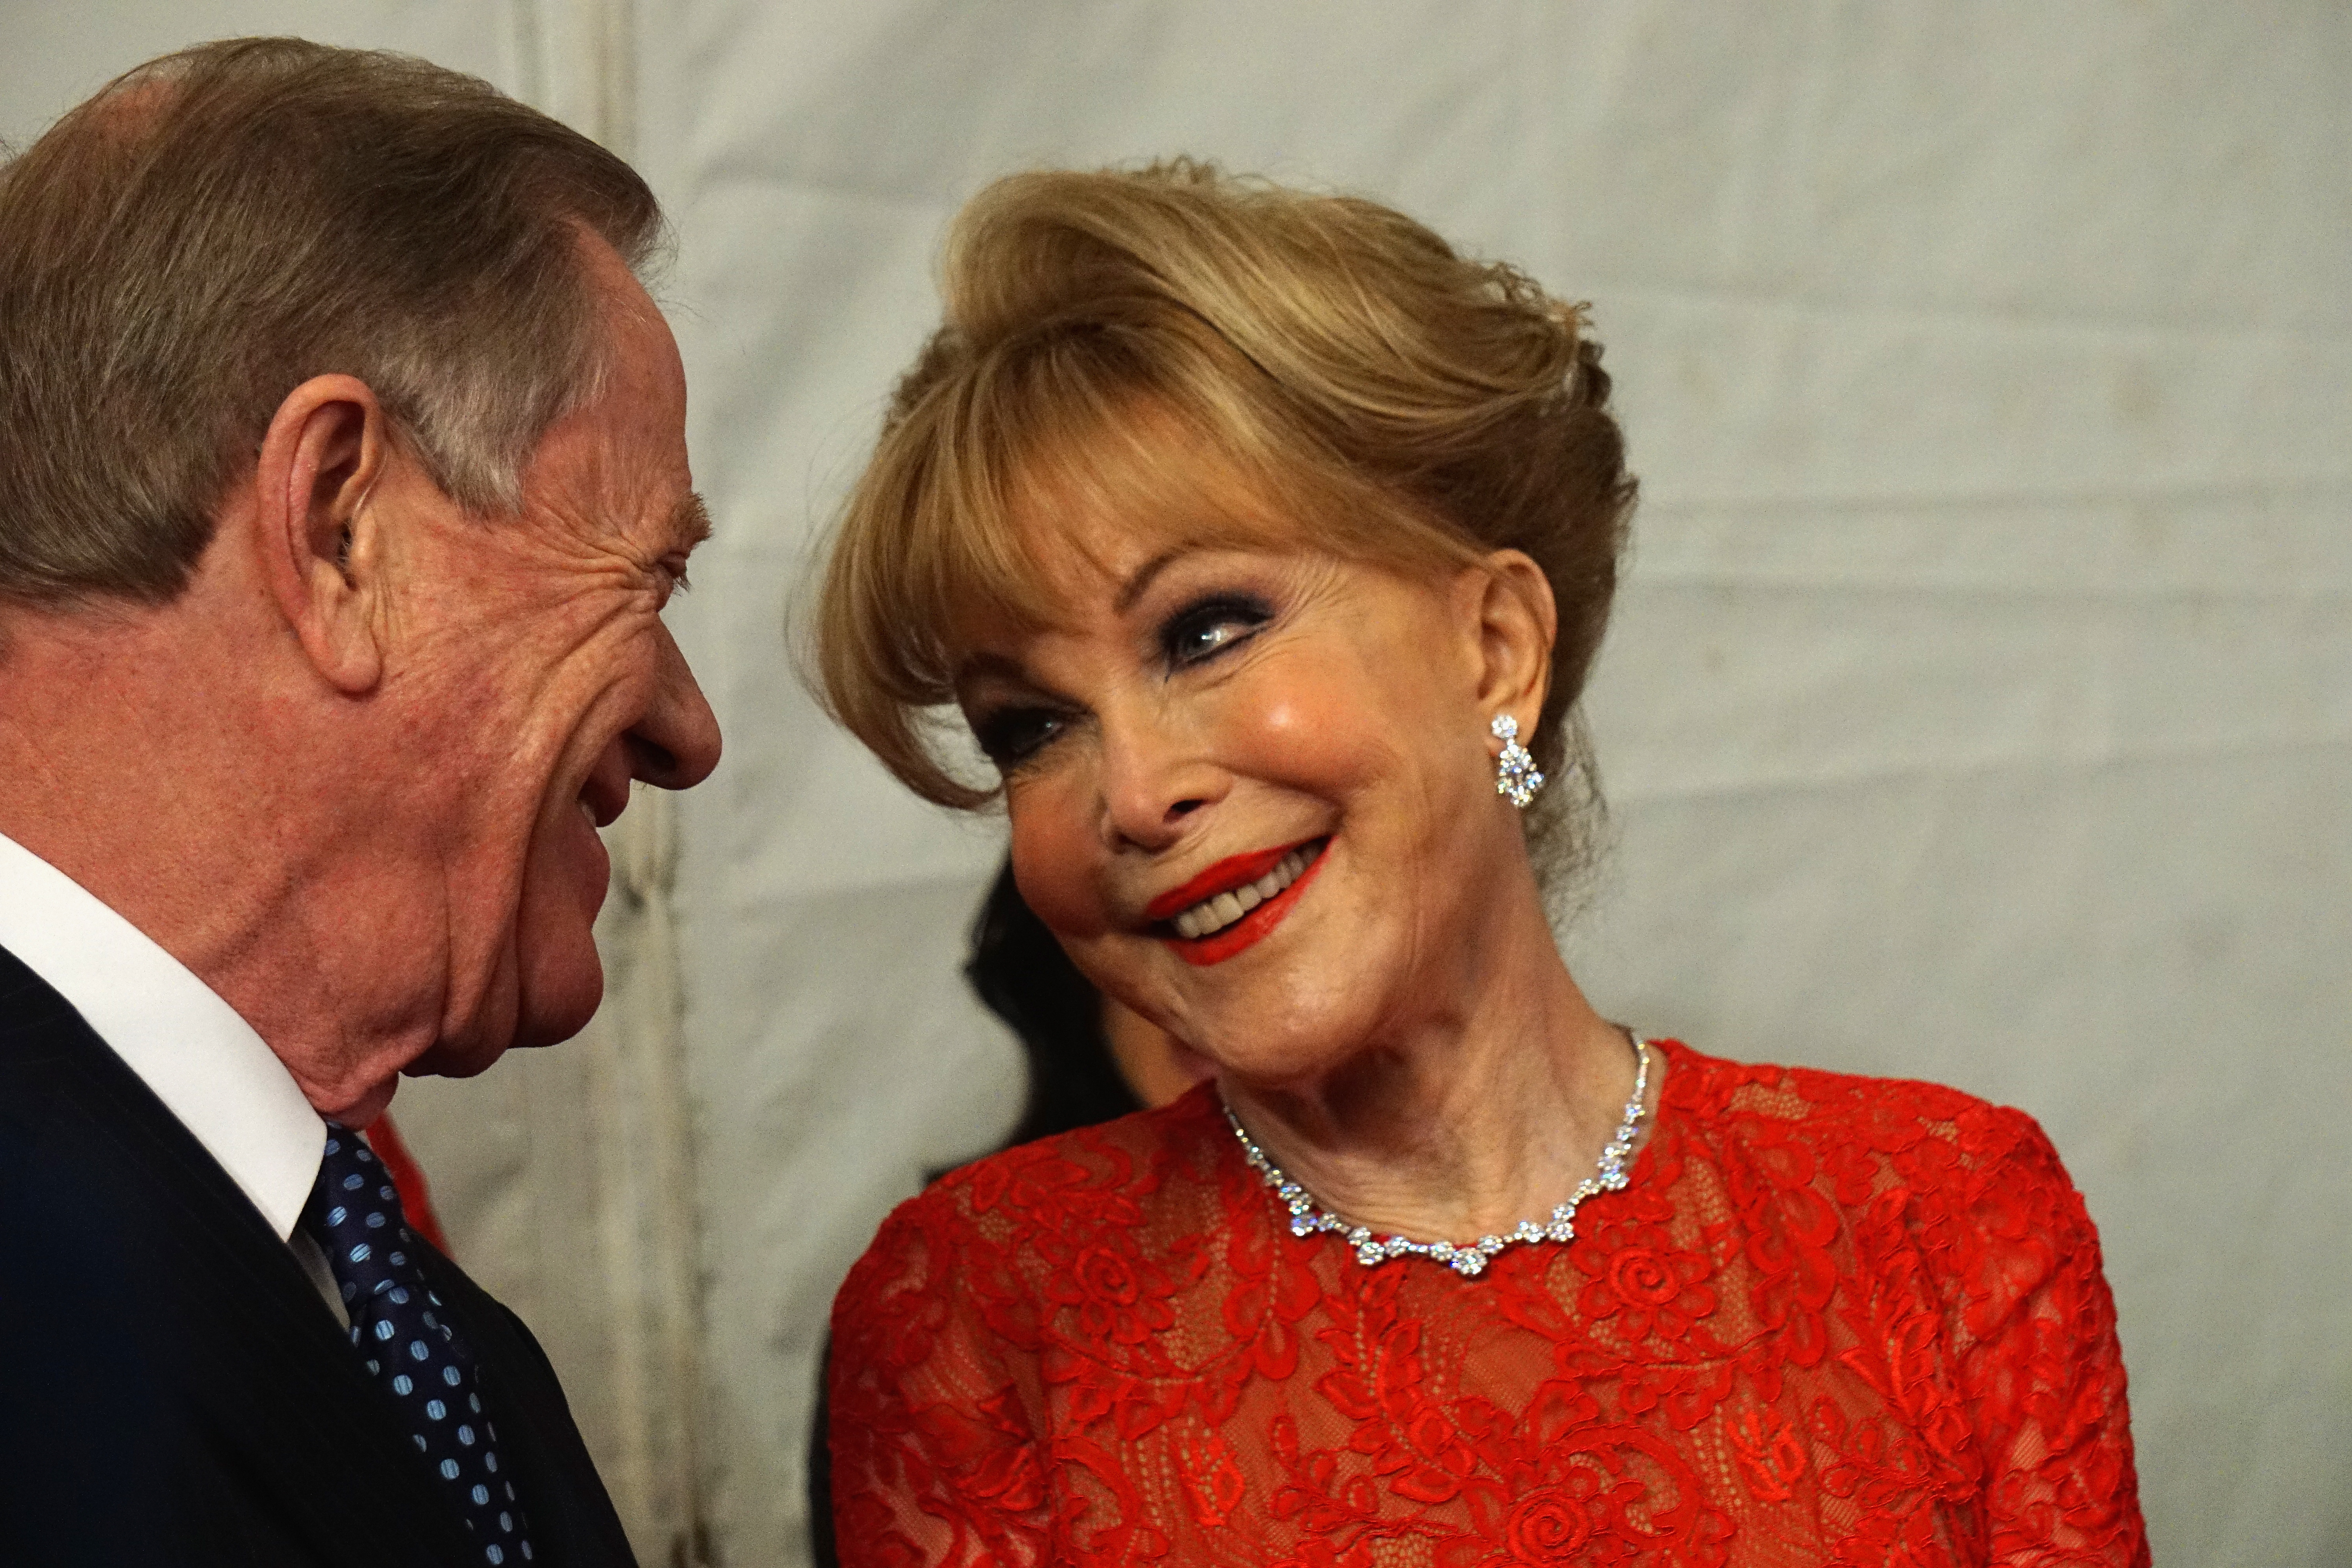 Barbara Eden and John Eicholtz during Mercedes-Benz Fashion Week Fall 2015 on February 12, 2015 in New York City | Source: Getty Images